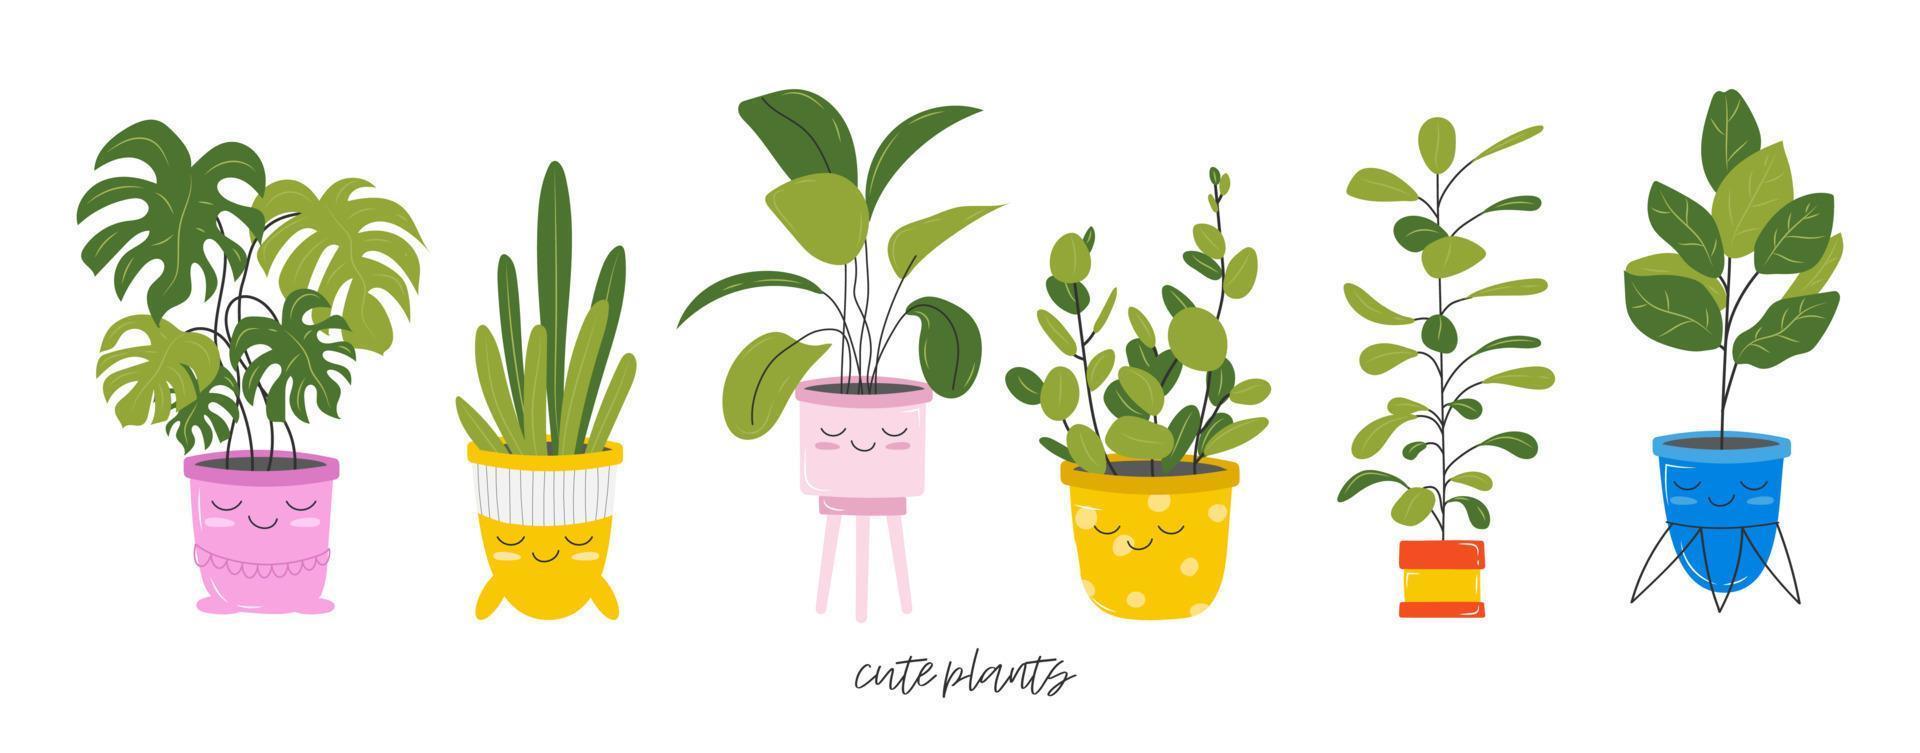 Set of cute kawaii houseplants in flower pots. Multicolored bright flowers and beautiful leaves. Exotic plants, decorative flowers. Vector stock illustration. Childrens illustration of stickers.